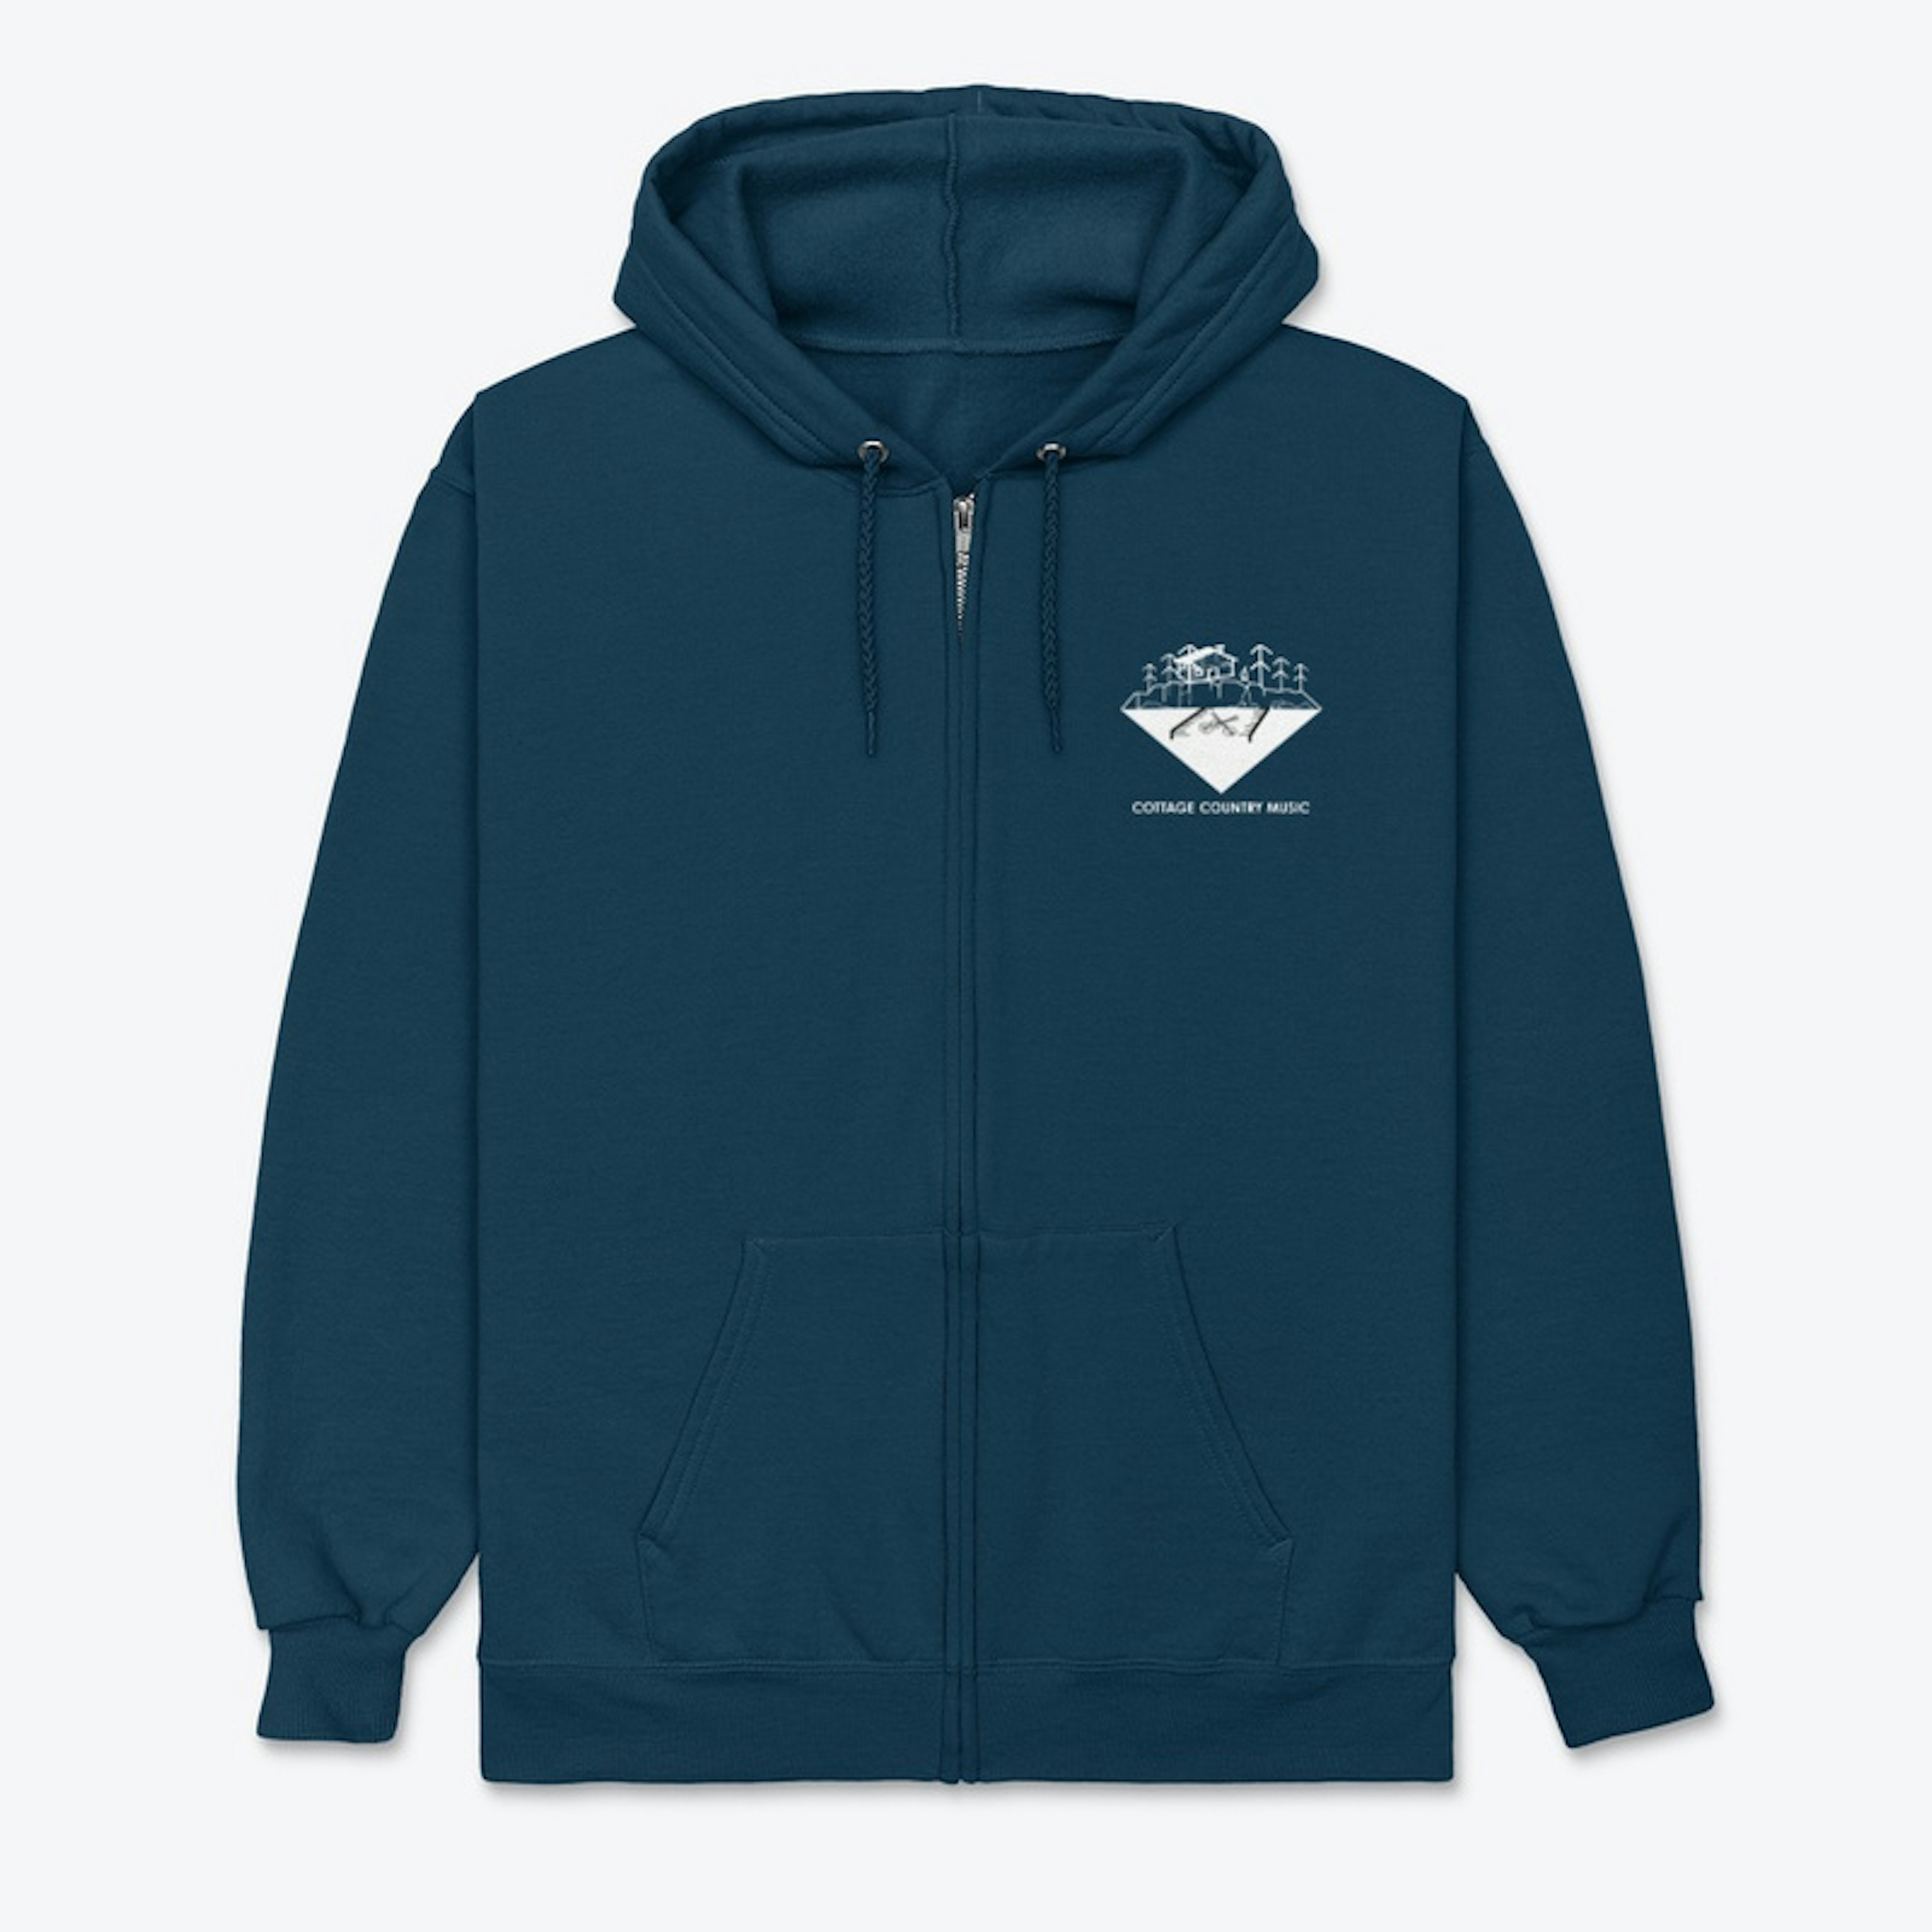 Cottage Country Music Zip Up Hoodie